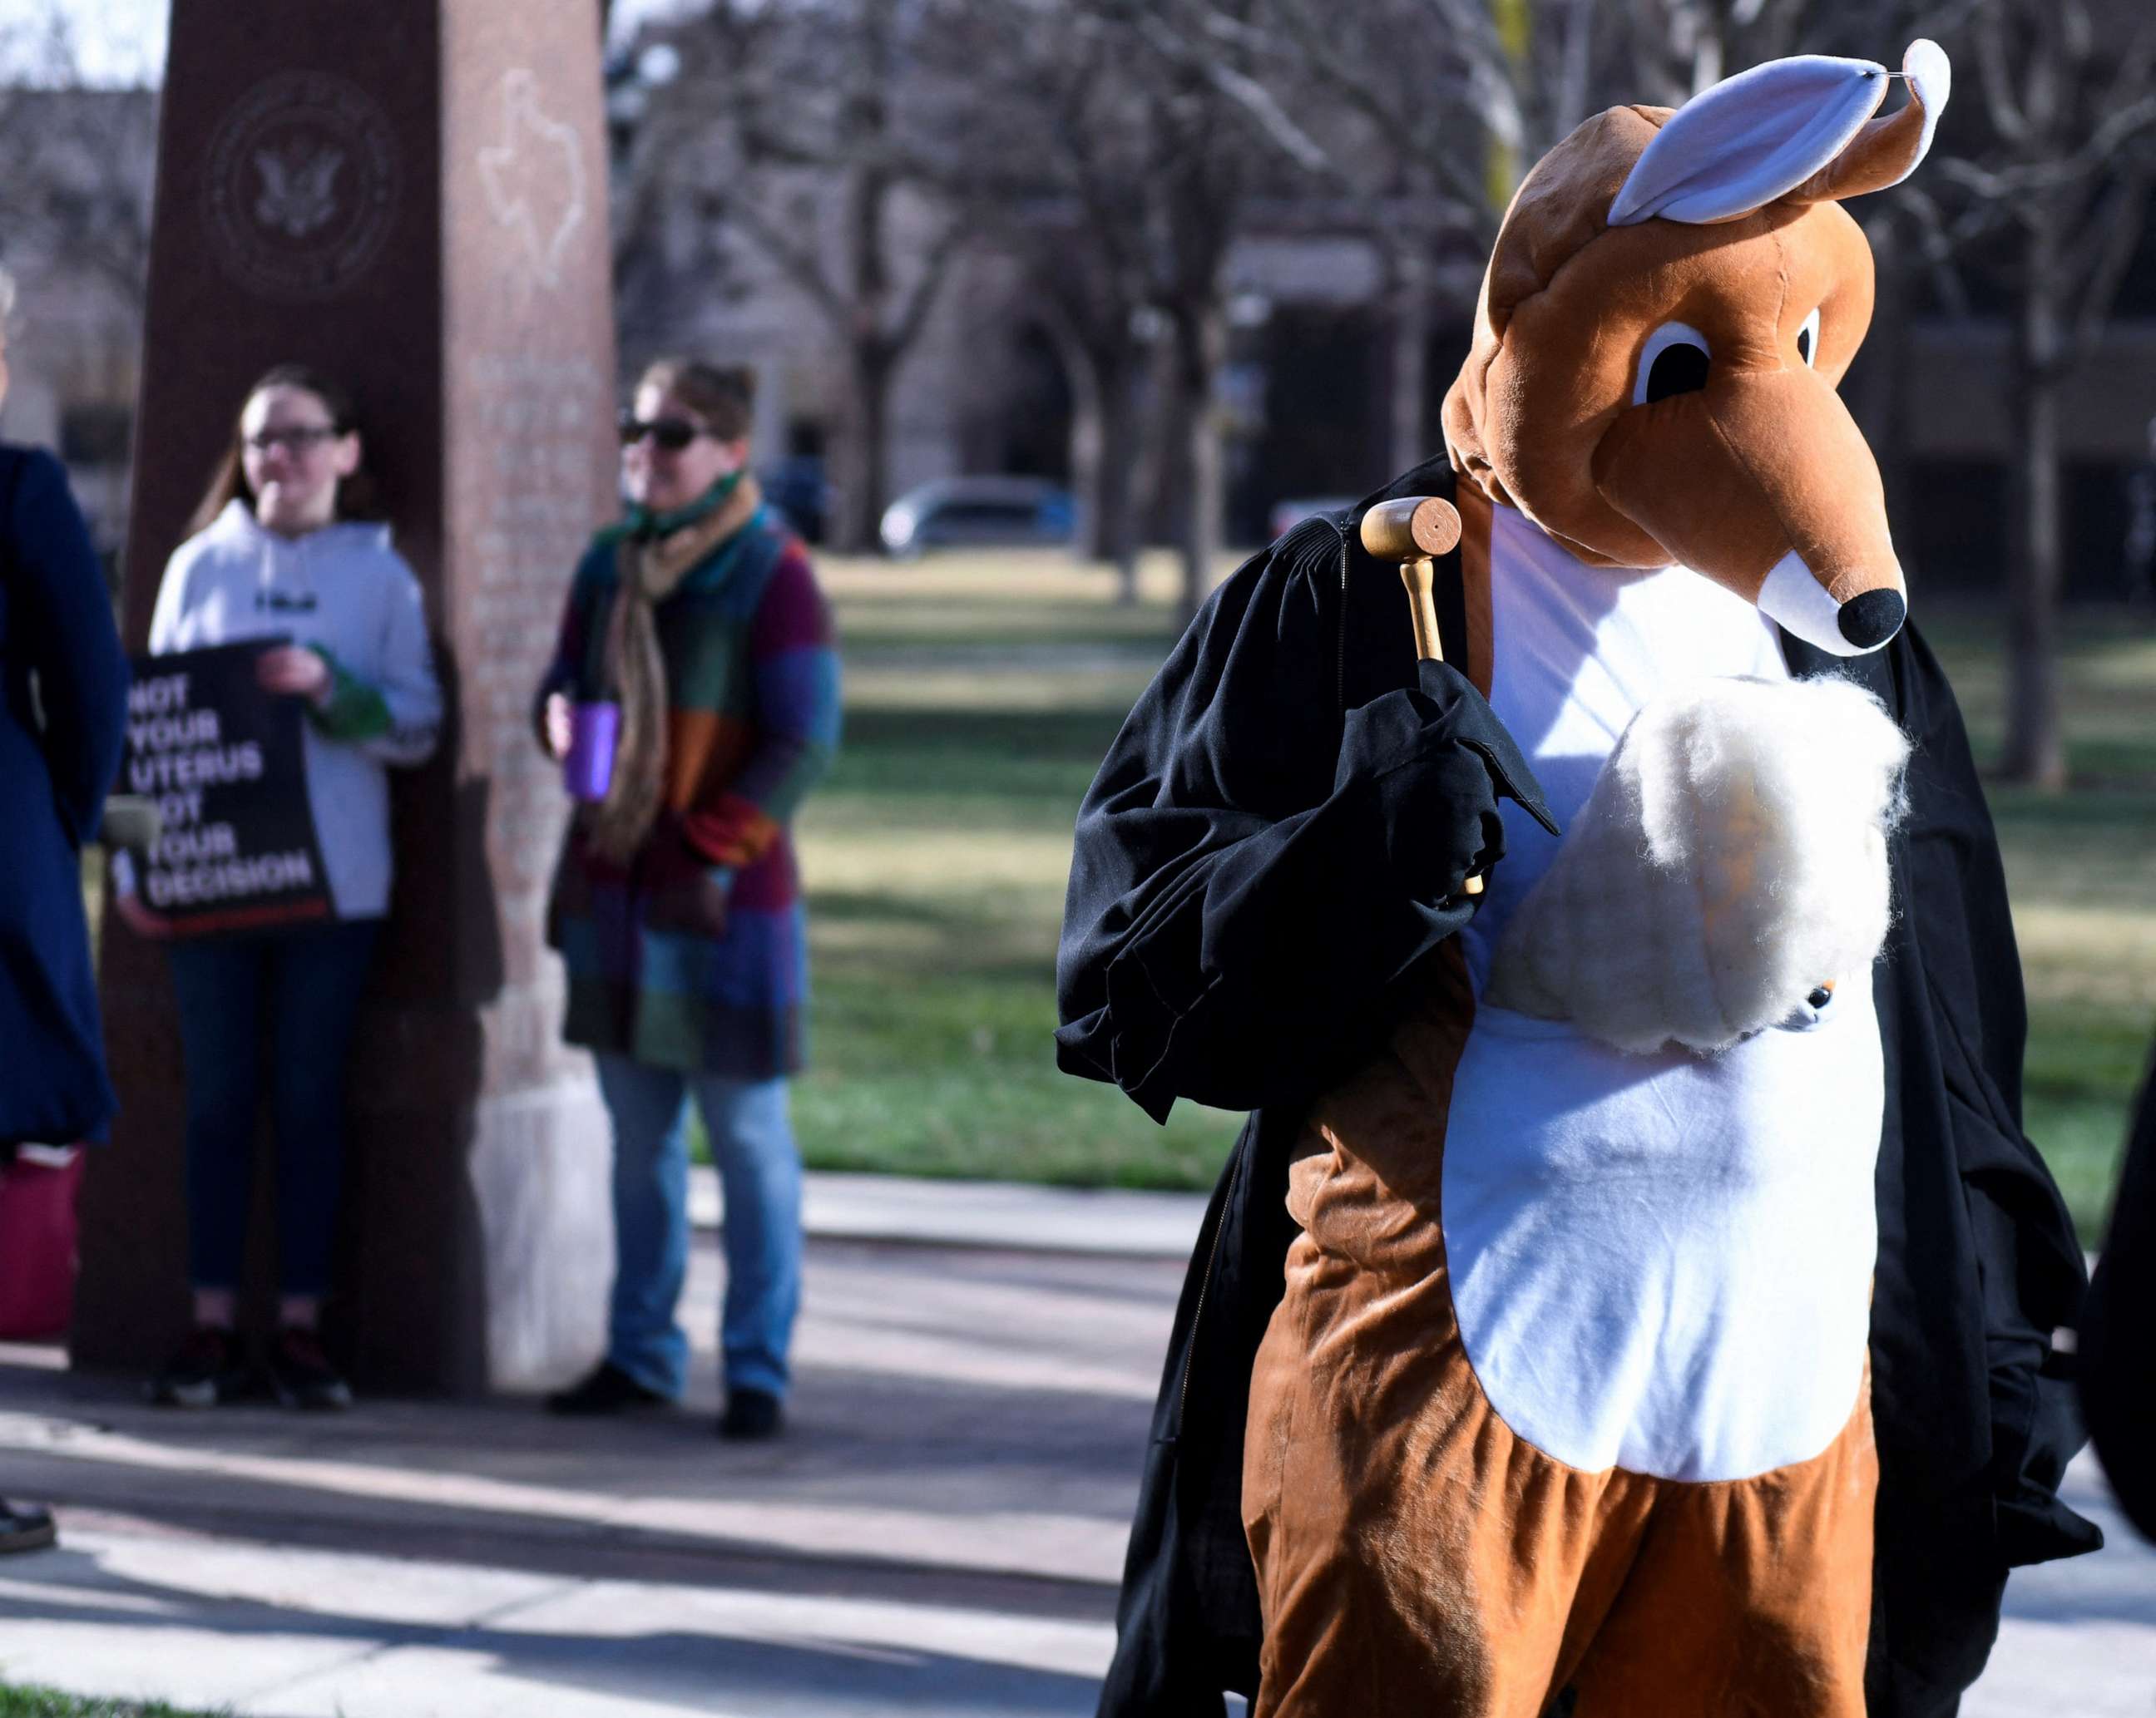 PHOTO: Jaime Cruz bangs a gavel in a kangaroo costume outside of the Federal Courthouse against Alliance for Hippocratic Medicine to pull mifepristone, a drug used in medication abortion, off the market in Amarillo, Texas, March 15, 2023.